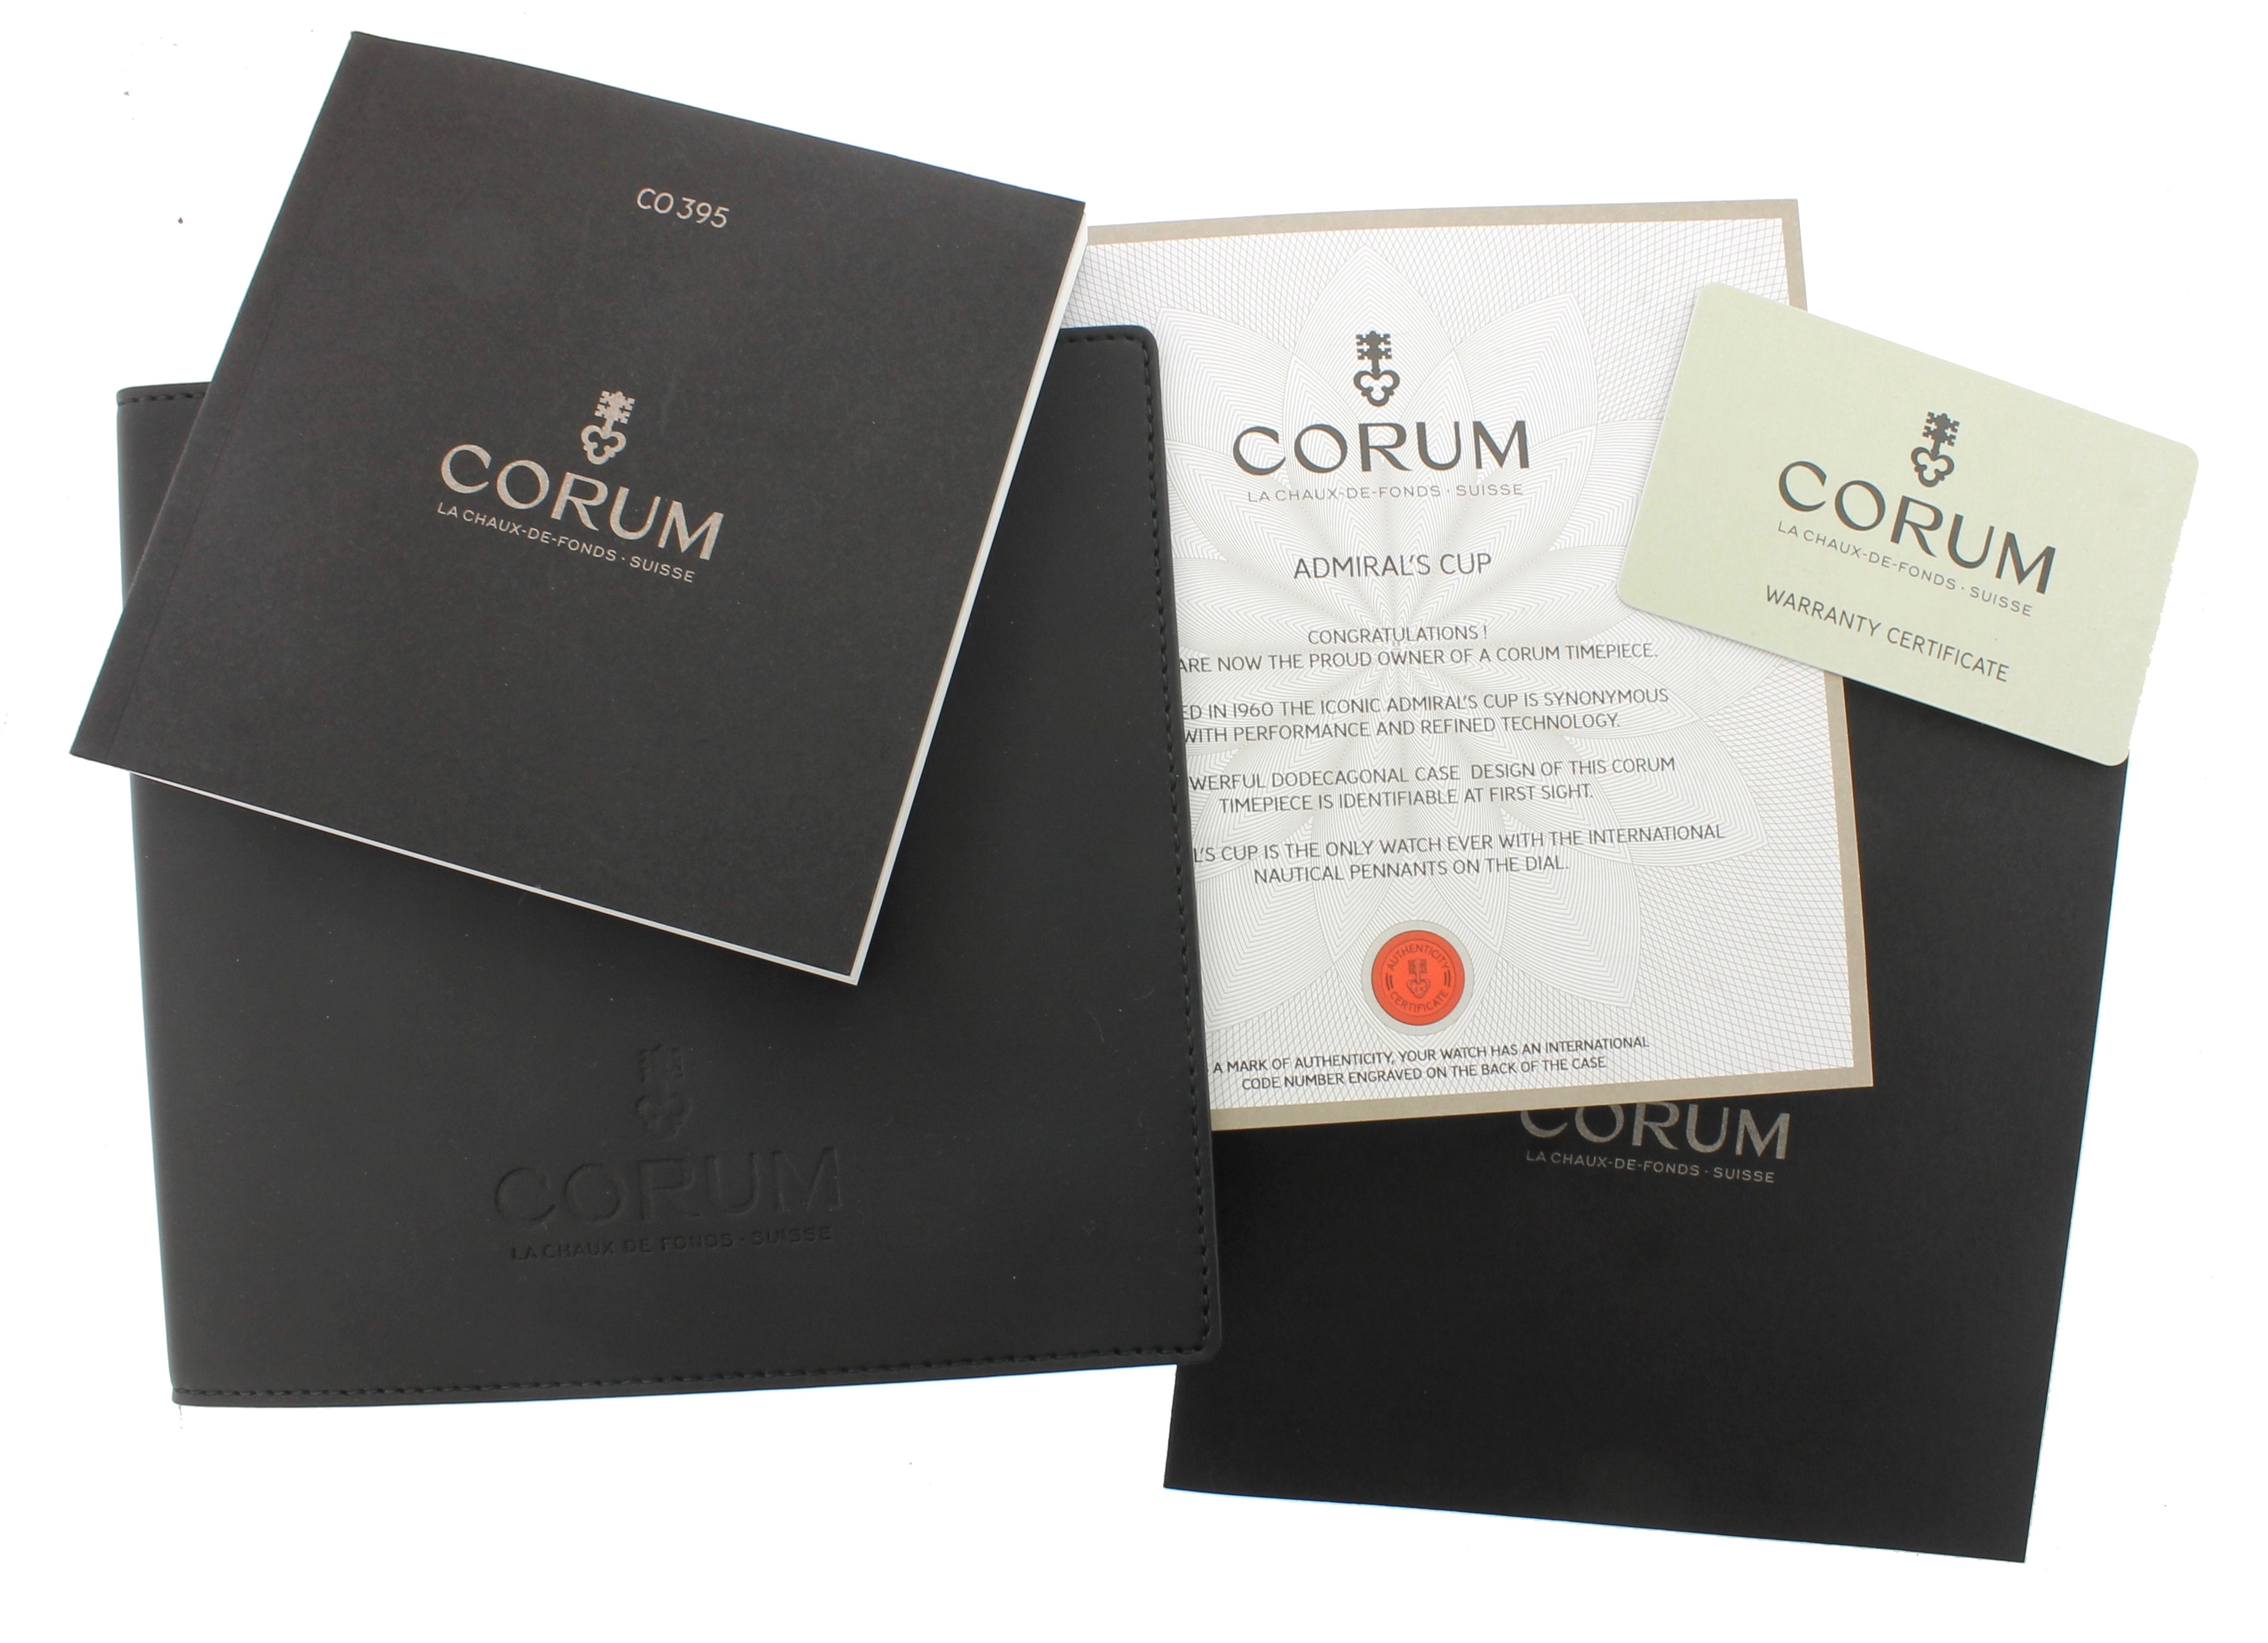 Corum Admiral's Cup Legend 42mm Two-Tone Rose Gold Watch 395.101.24/0F62 FH11